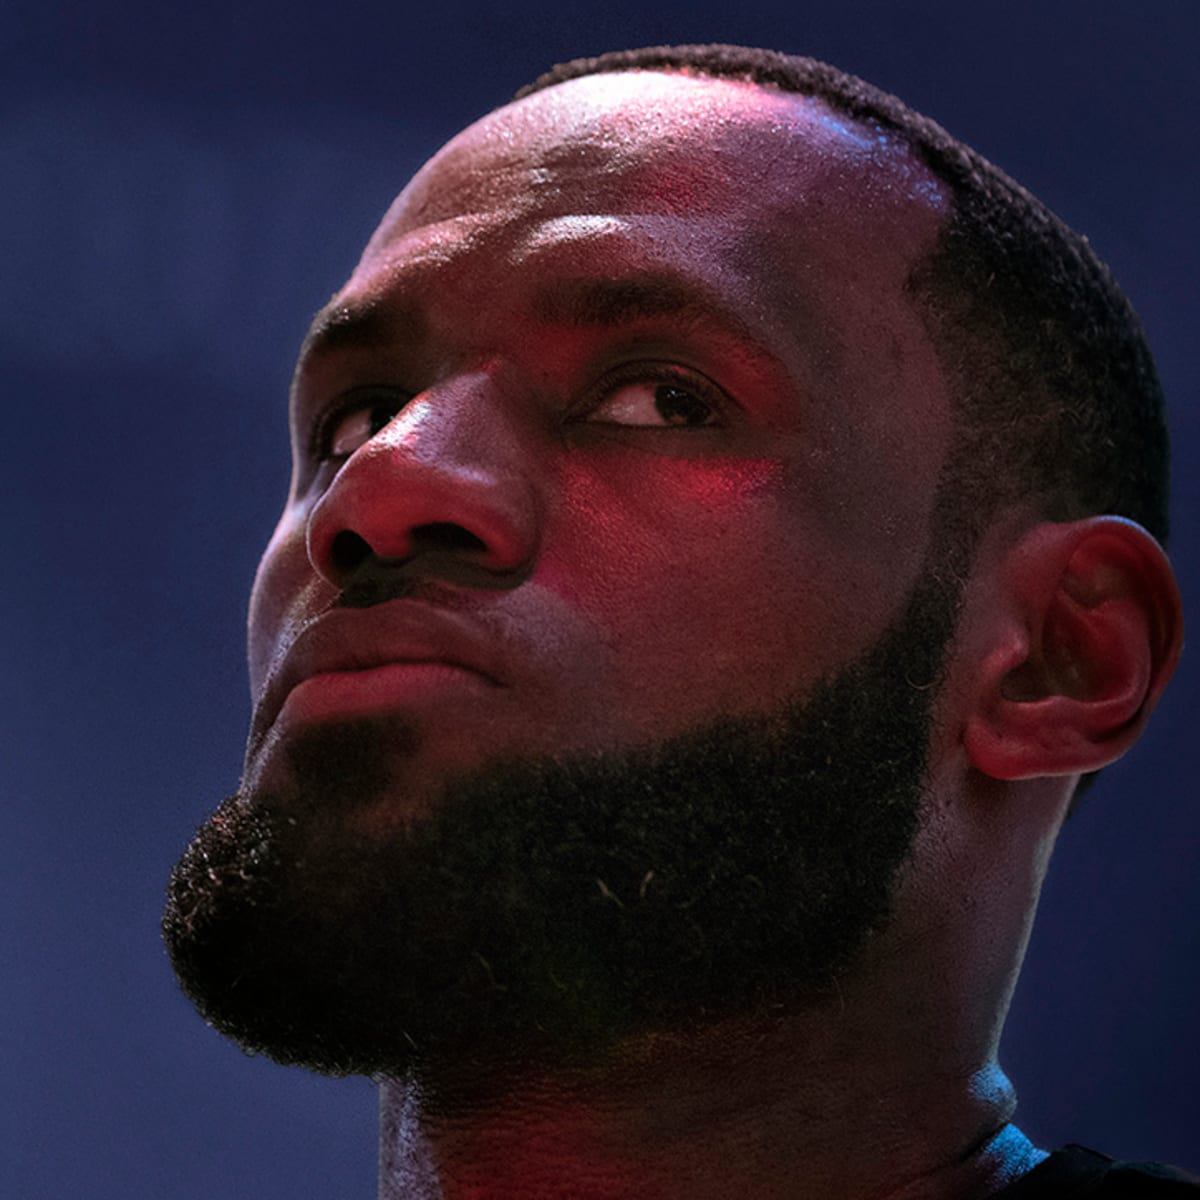 LeBron James Named TIME Magazine's Athlete of the Year 2020, LA Lakers  Superstar Honoured for Achievements On & off Basketball Court